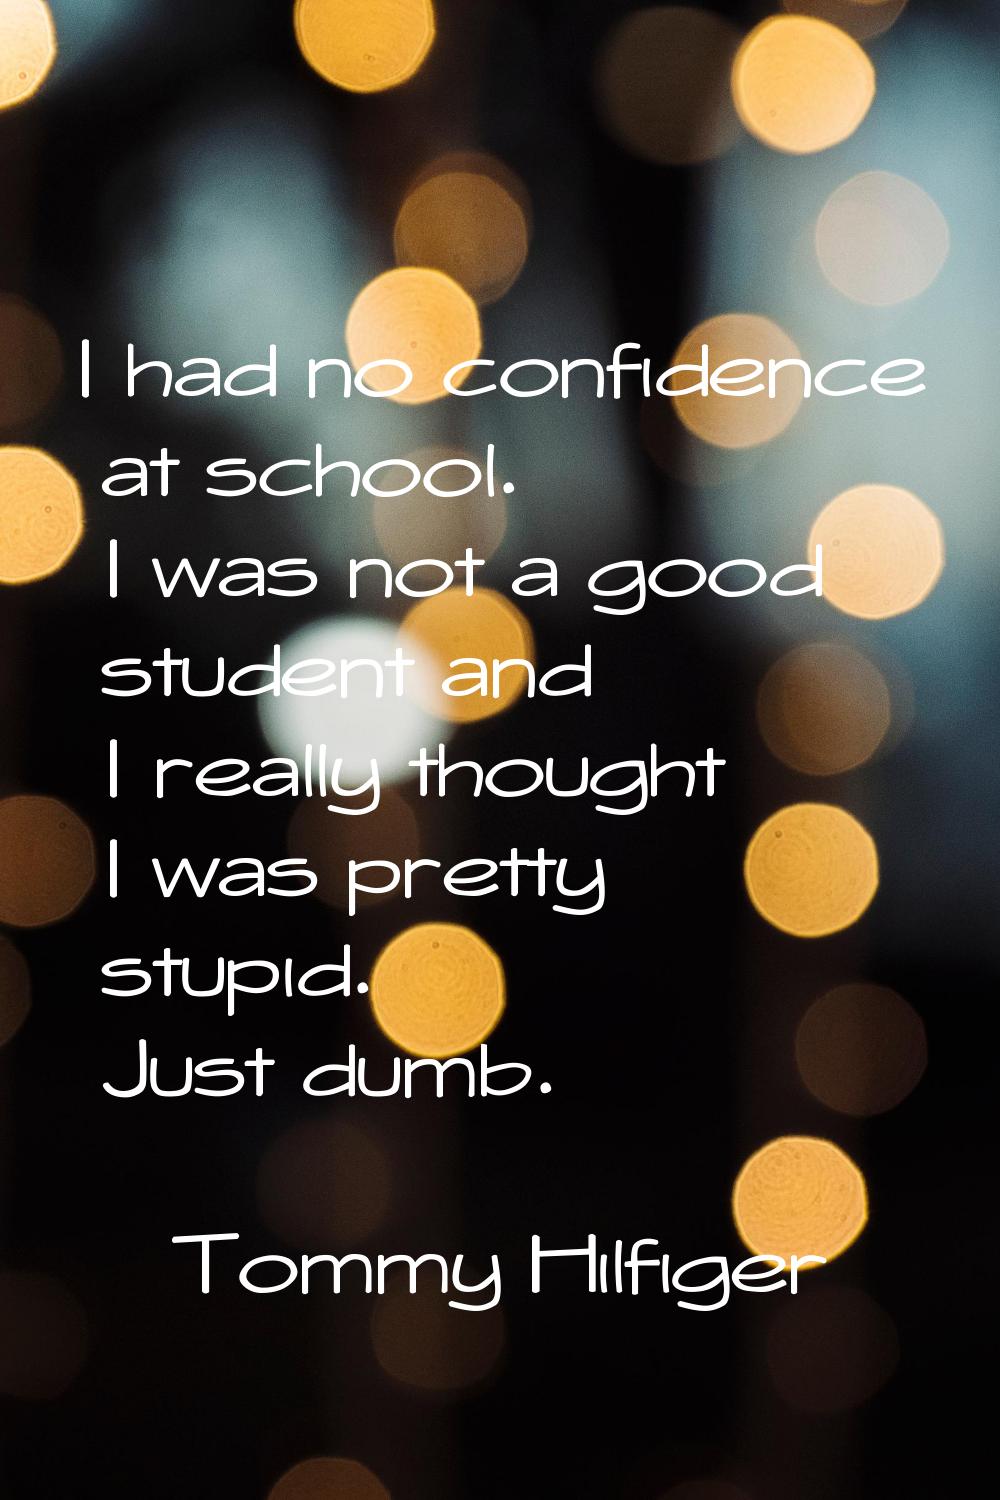 I had no confidence at school. I was not a good student and I really thought I was pretty stupid. J